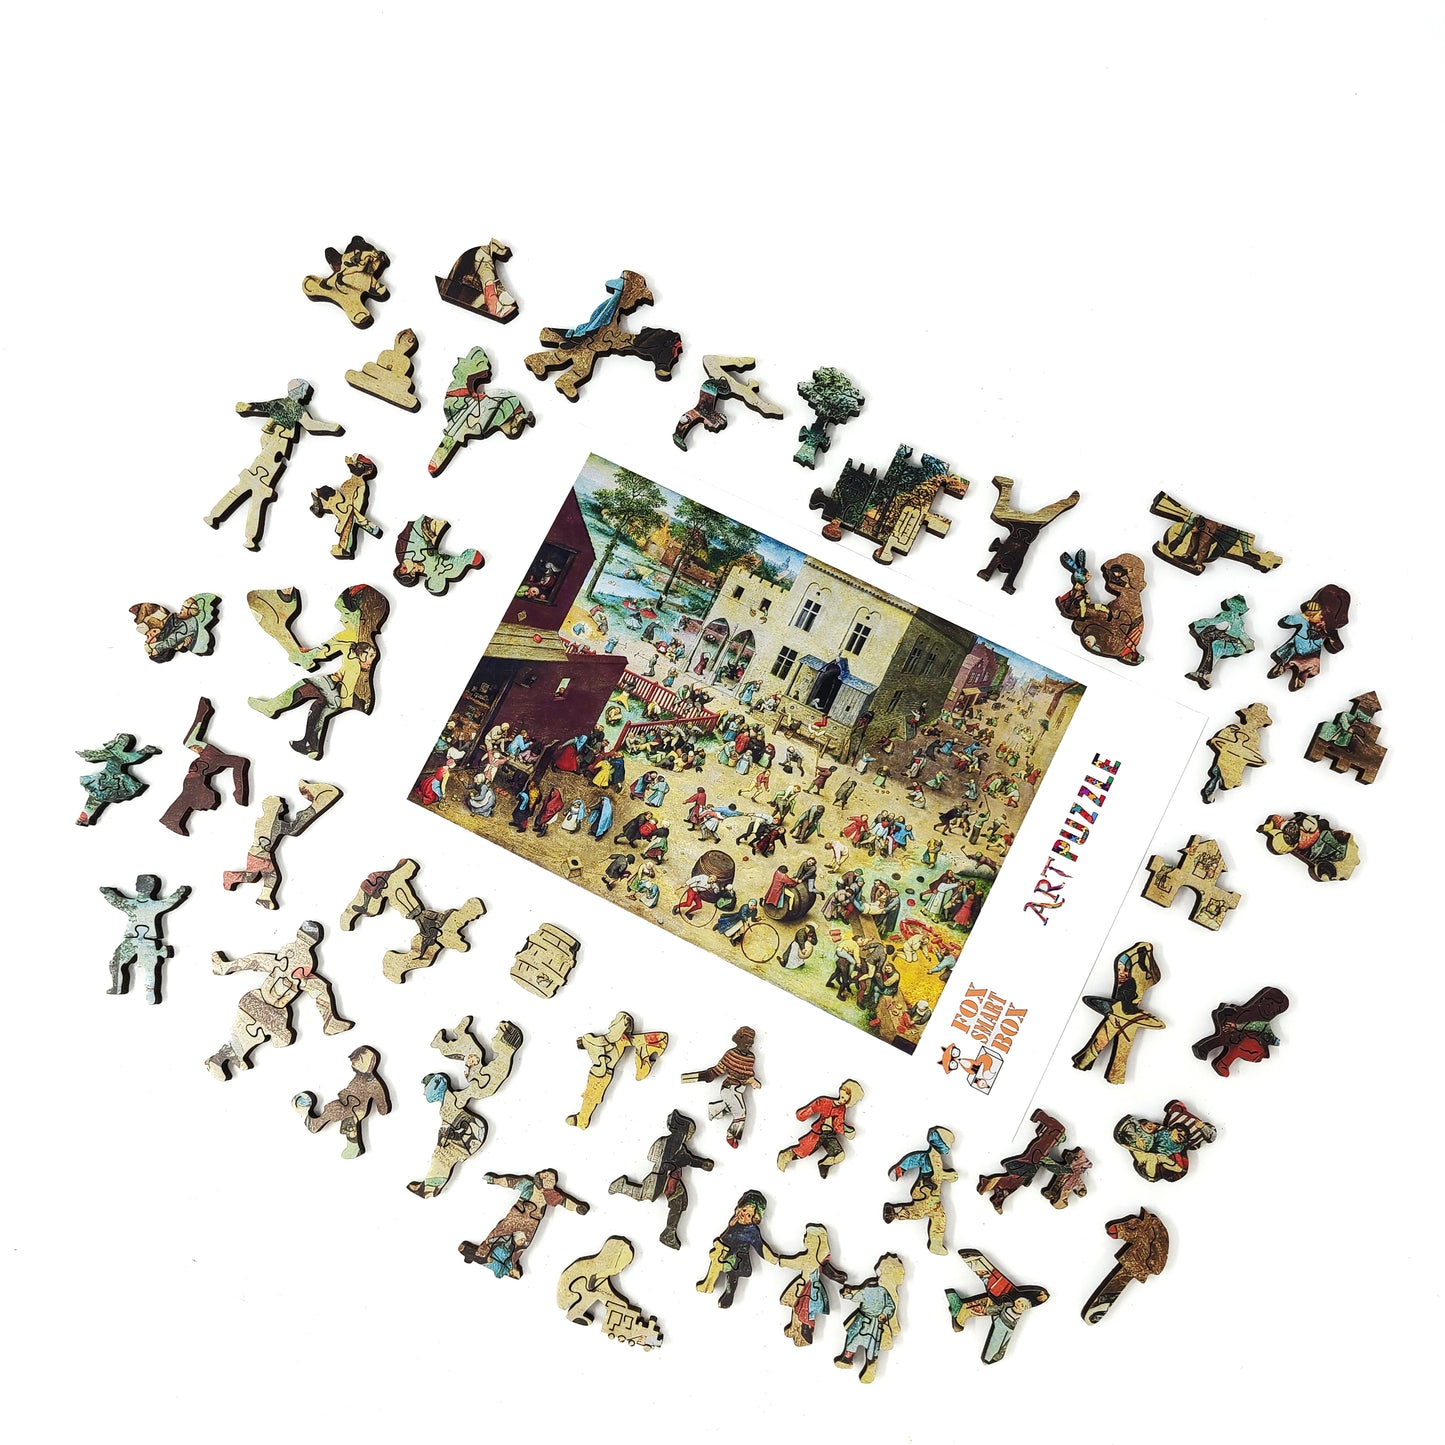 Wooden Jigsaw Puzzle with Uniquely Shaped Pieces for Adults - 560 Pieces - Children's Games